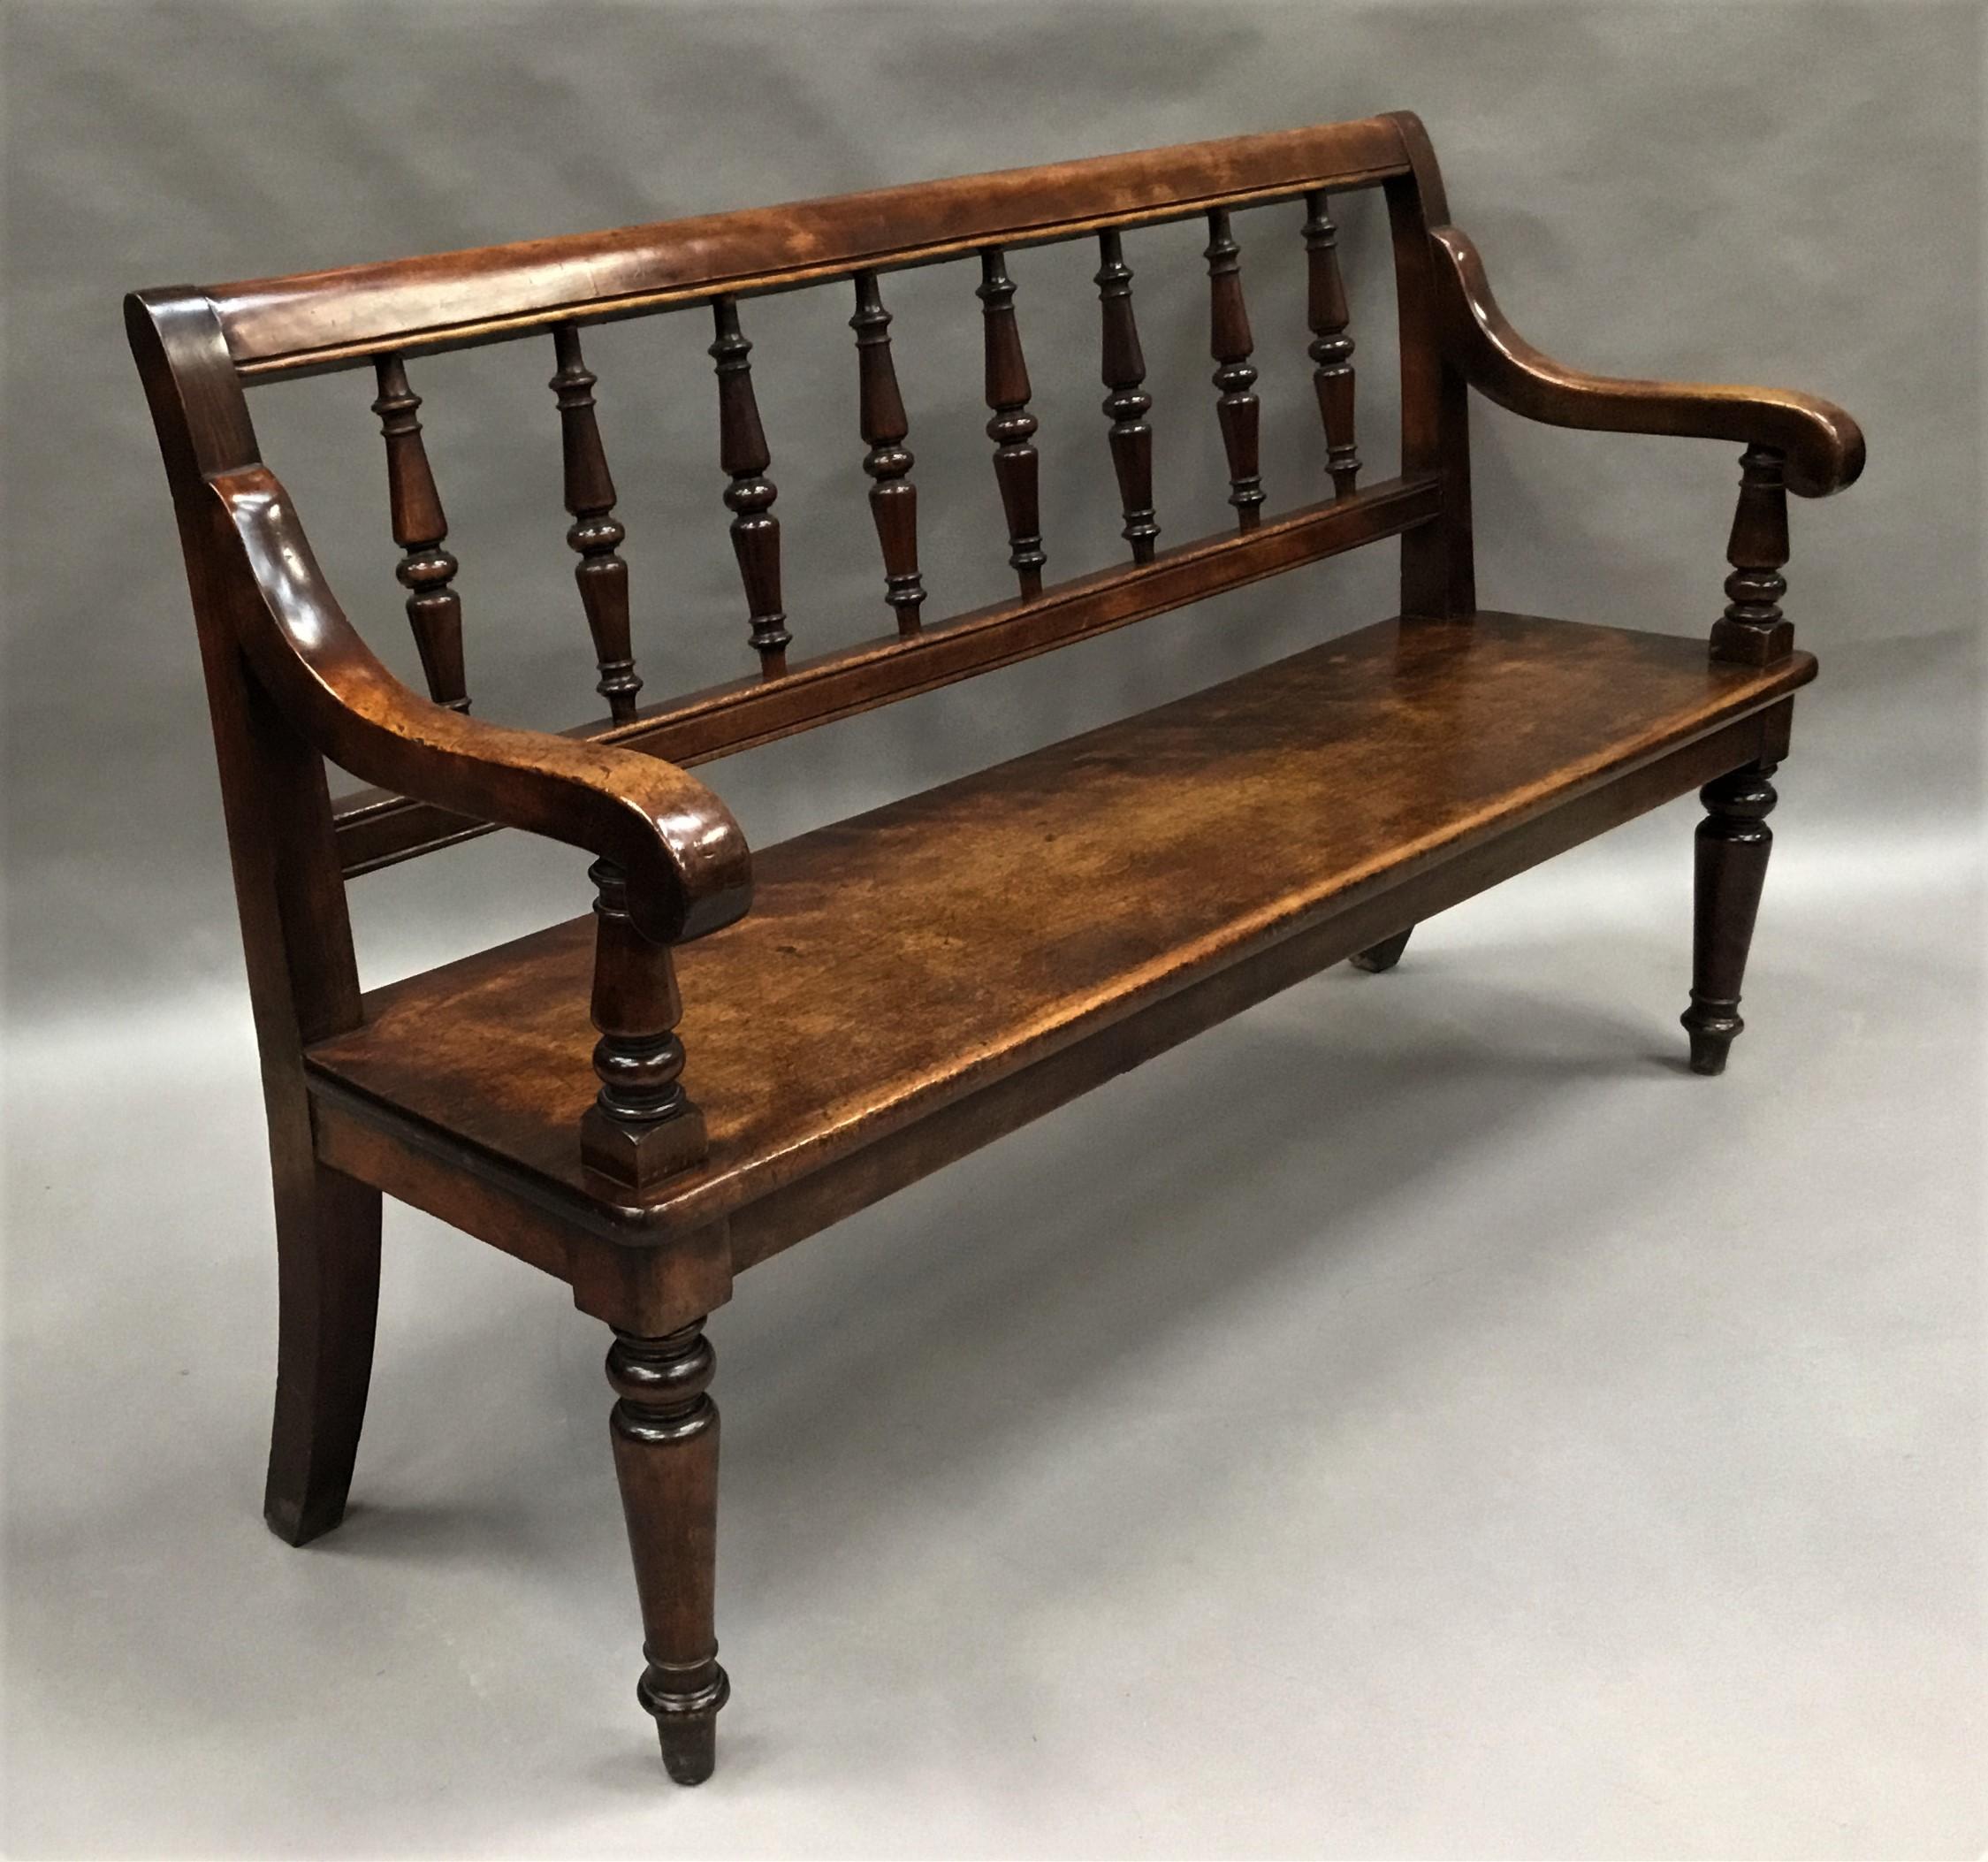 George IV birch hall seat or hall bench of bold proportions, the well figured molded top rail above 8 turned balluster spindles. The scrolled arms on tapering supports, raised on the solid rectangular seat with sabre legs to the reverse and turned